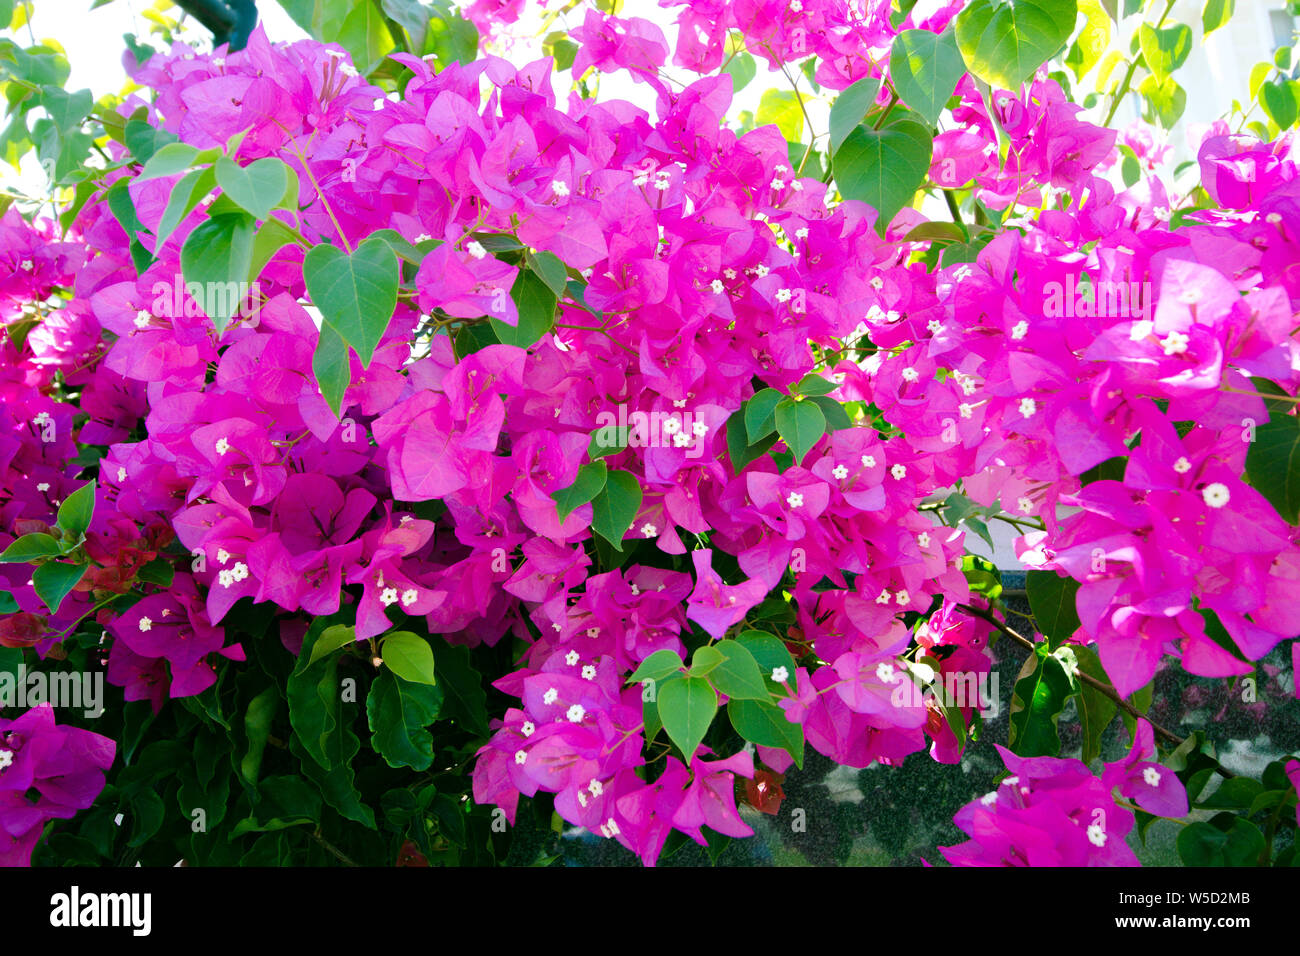 Beautiful flowers of purple hue. A lot of flowers bloomed on a green bush. Stock Photo